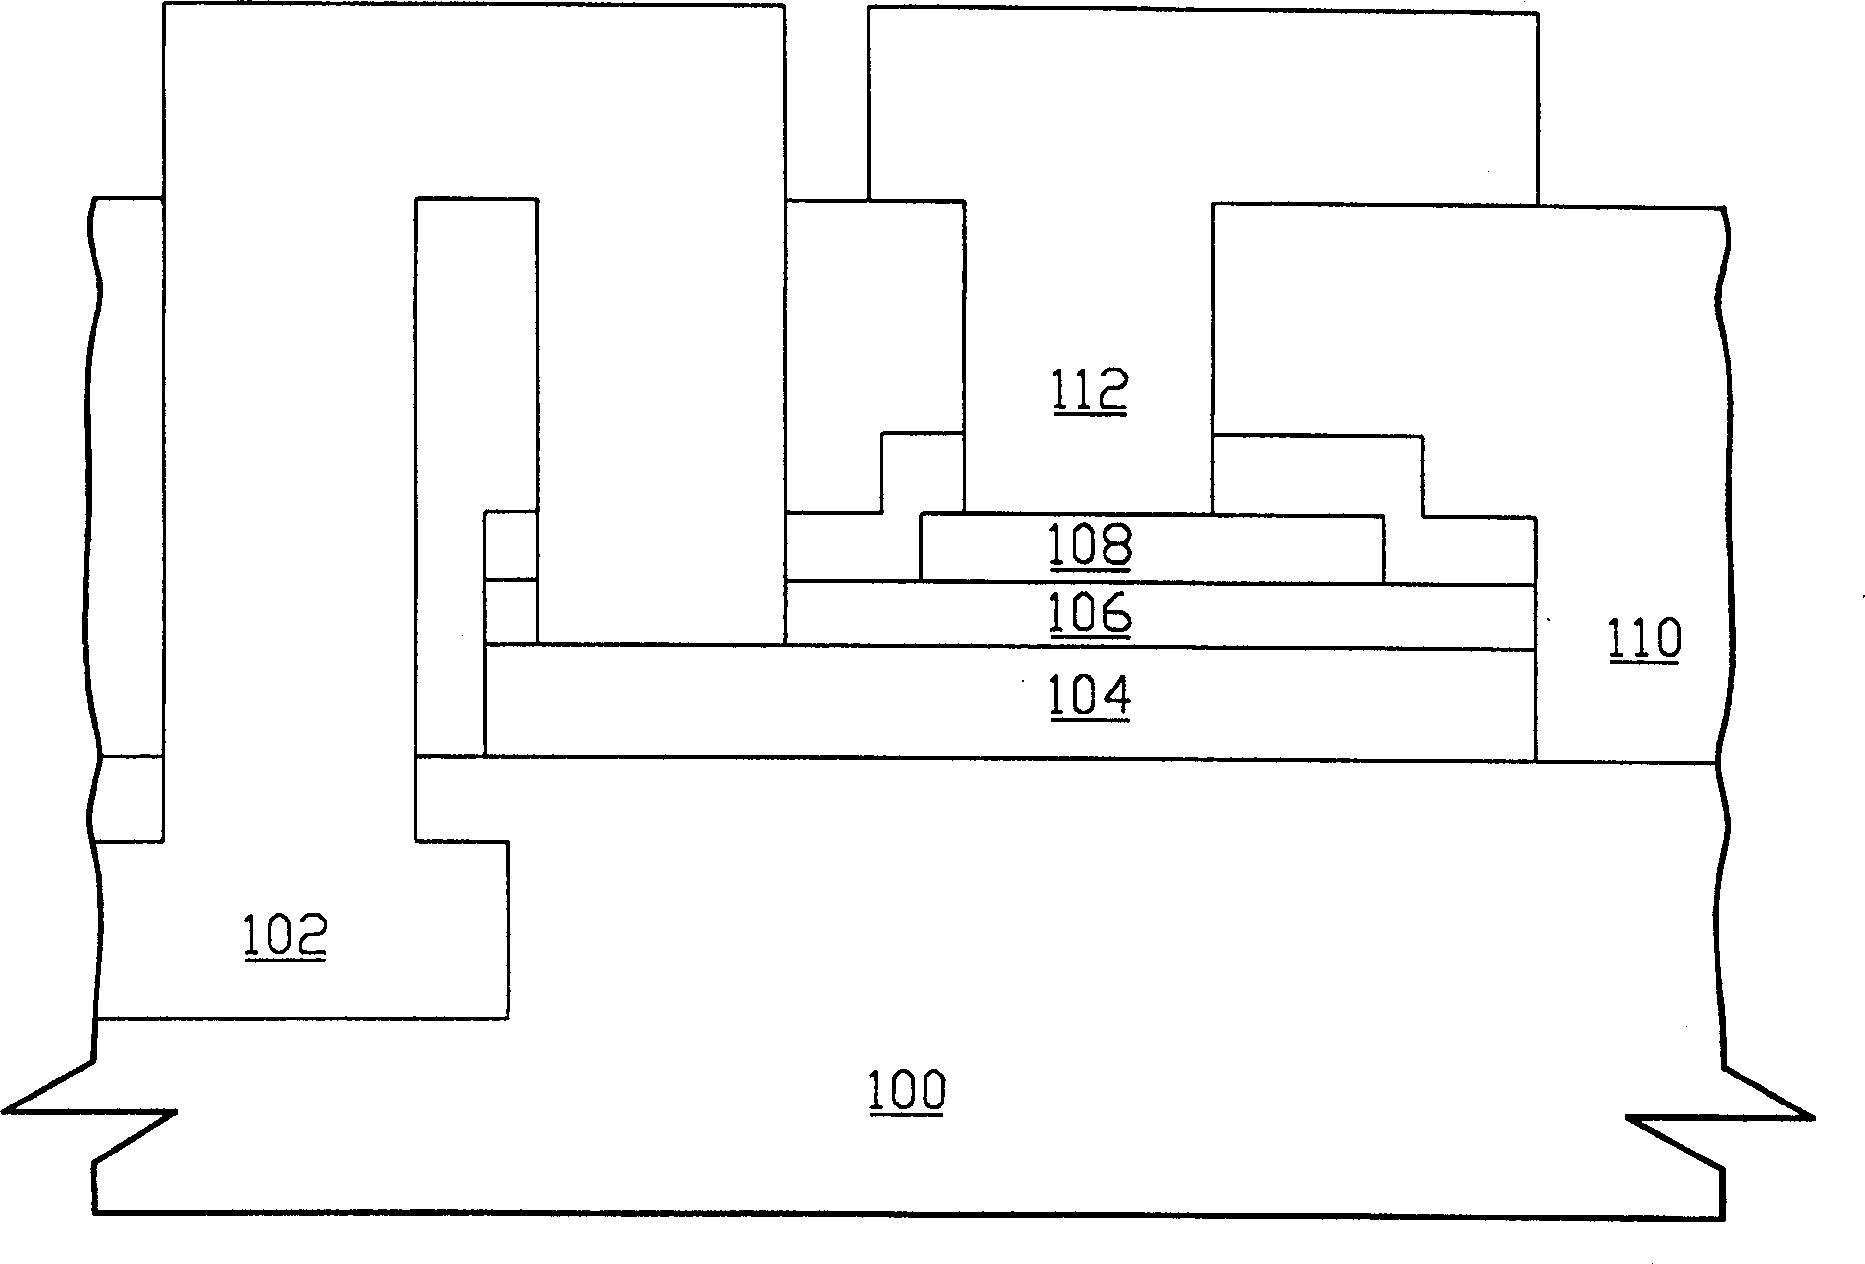 Embedded capacitor structure used for logic integrated cireuit